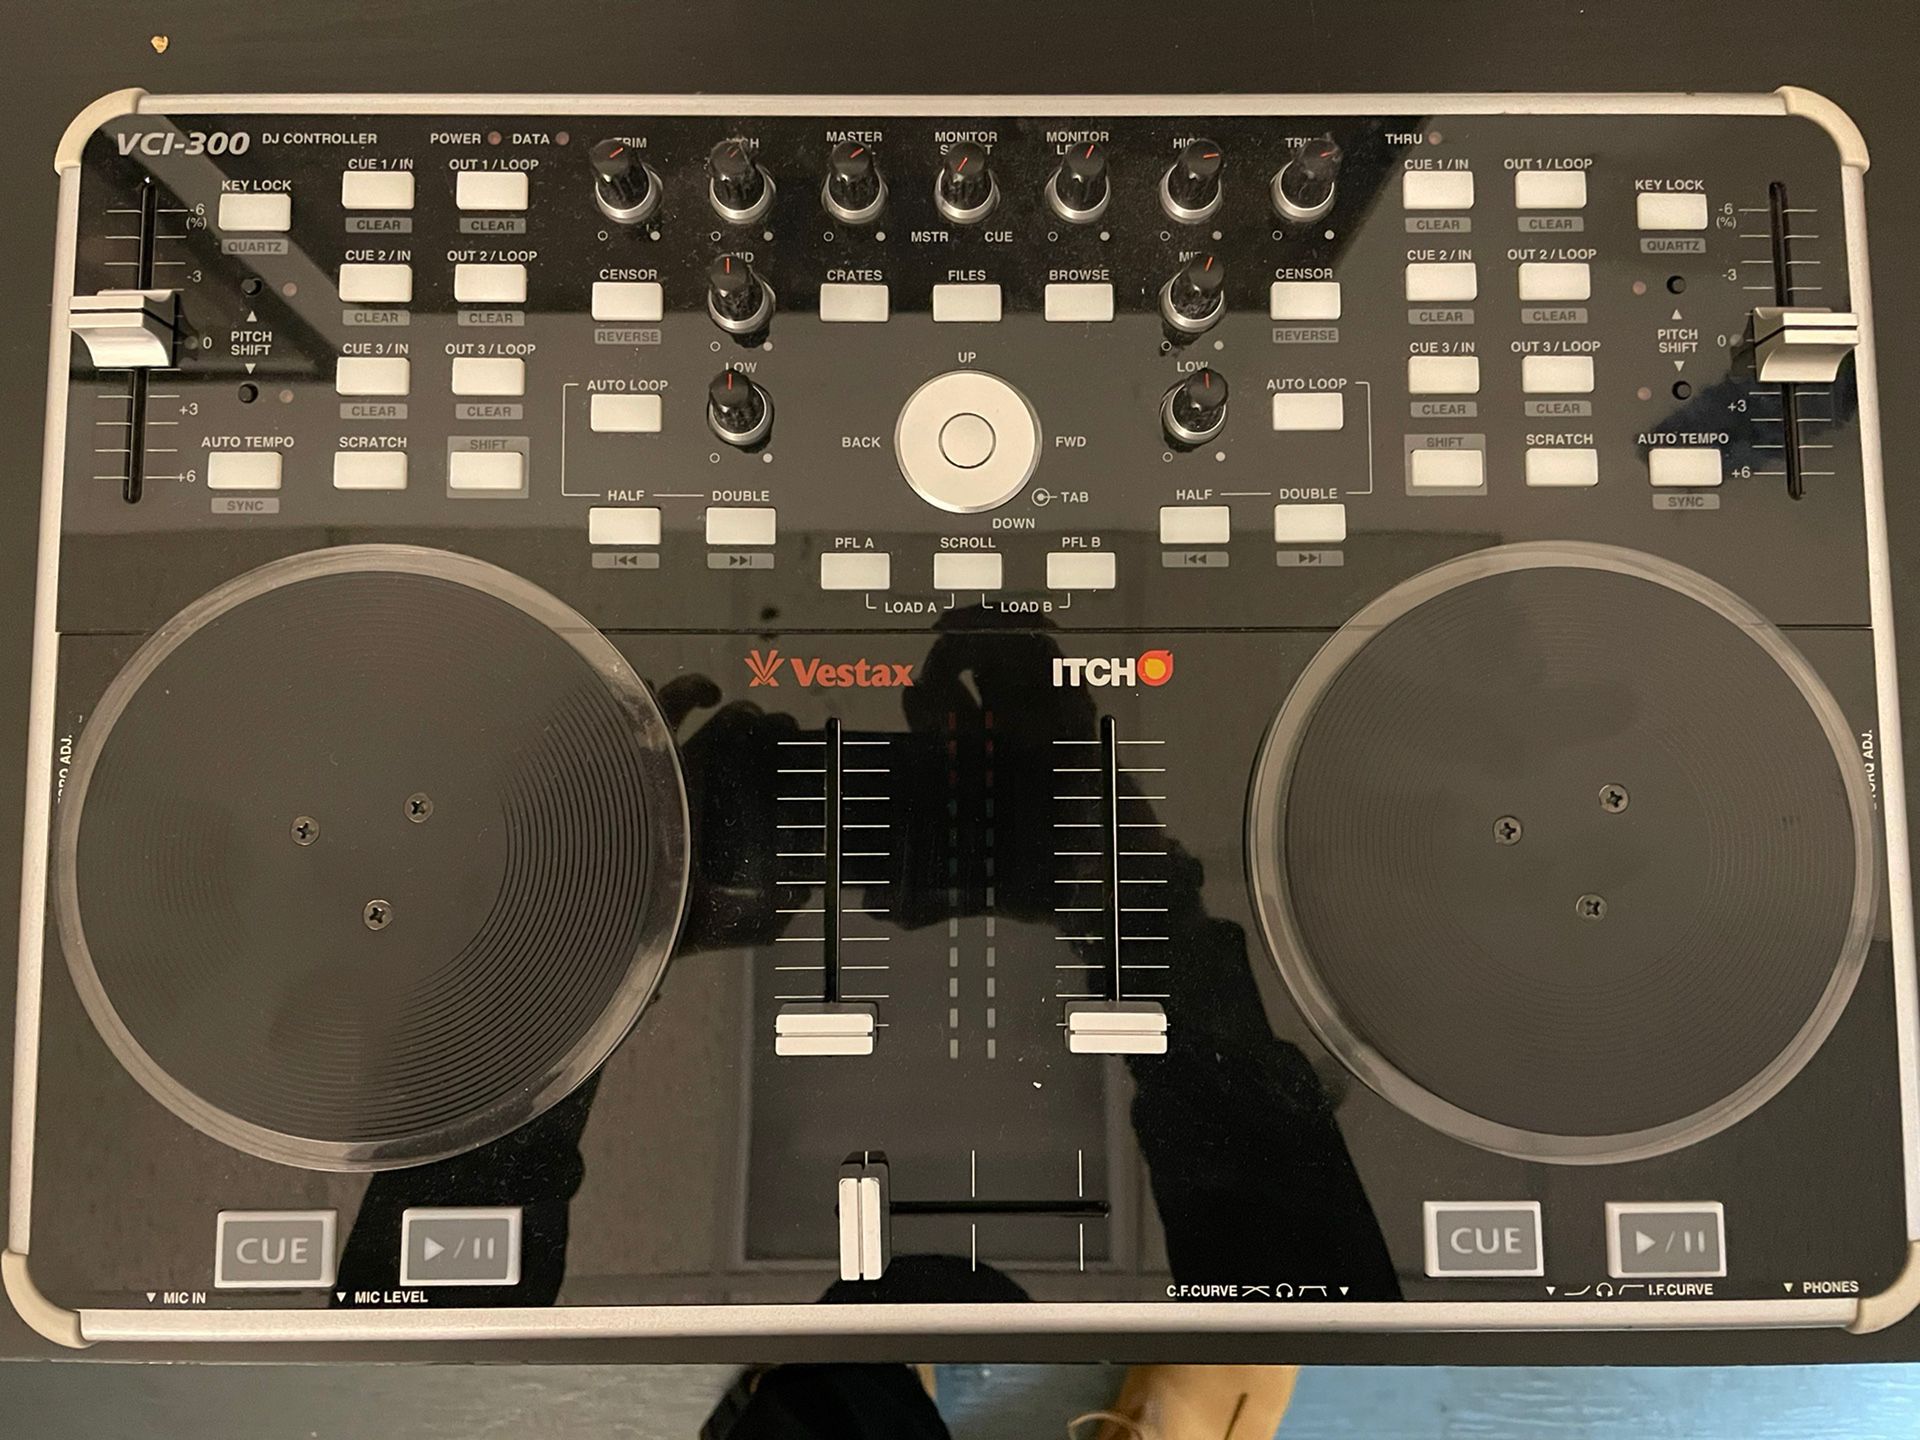 Vestax VCI-300 ITCH DJ Controller for serato for Sale in Queens